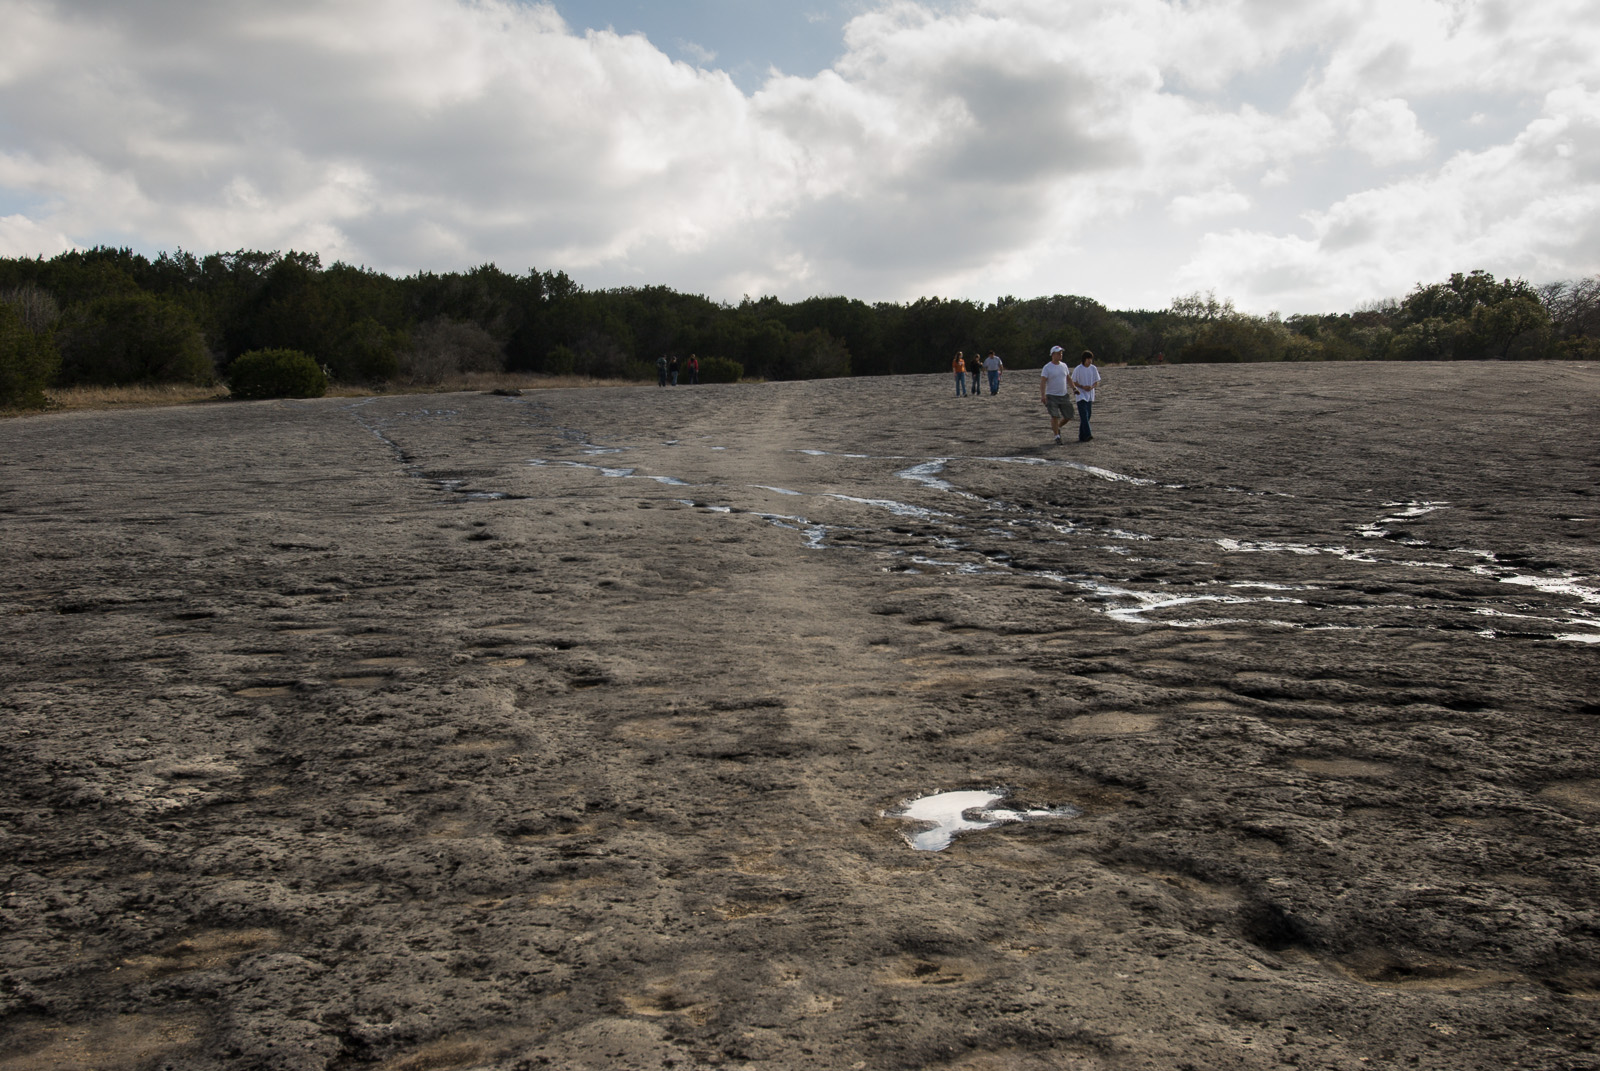 rock indentations in a dry creek with five people walking under clouds